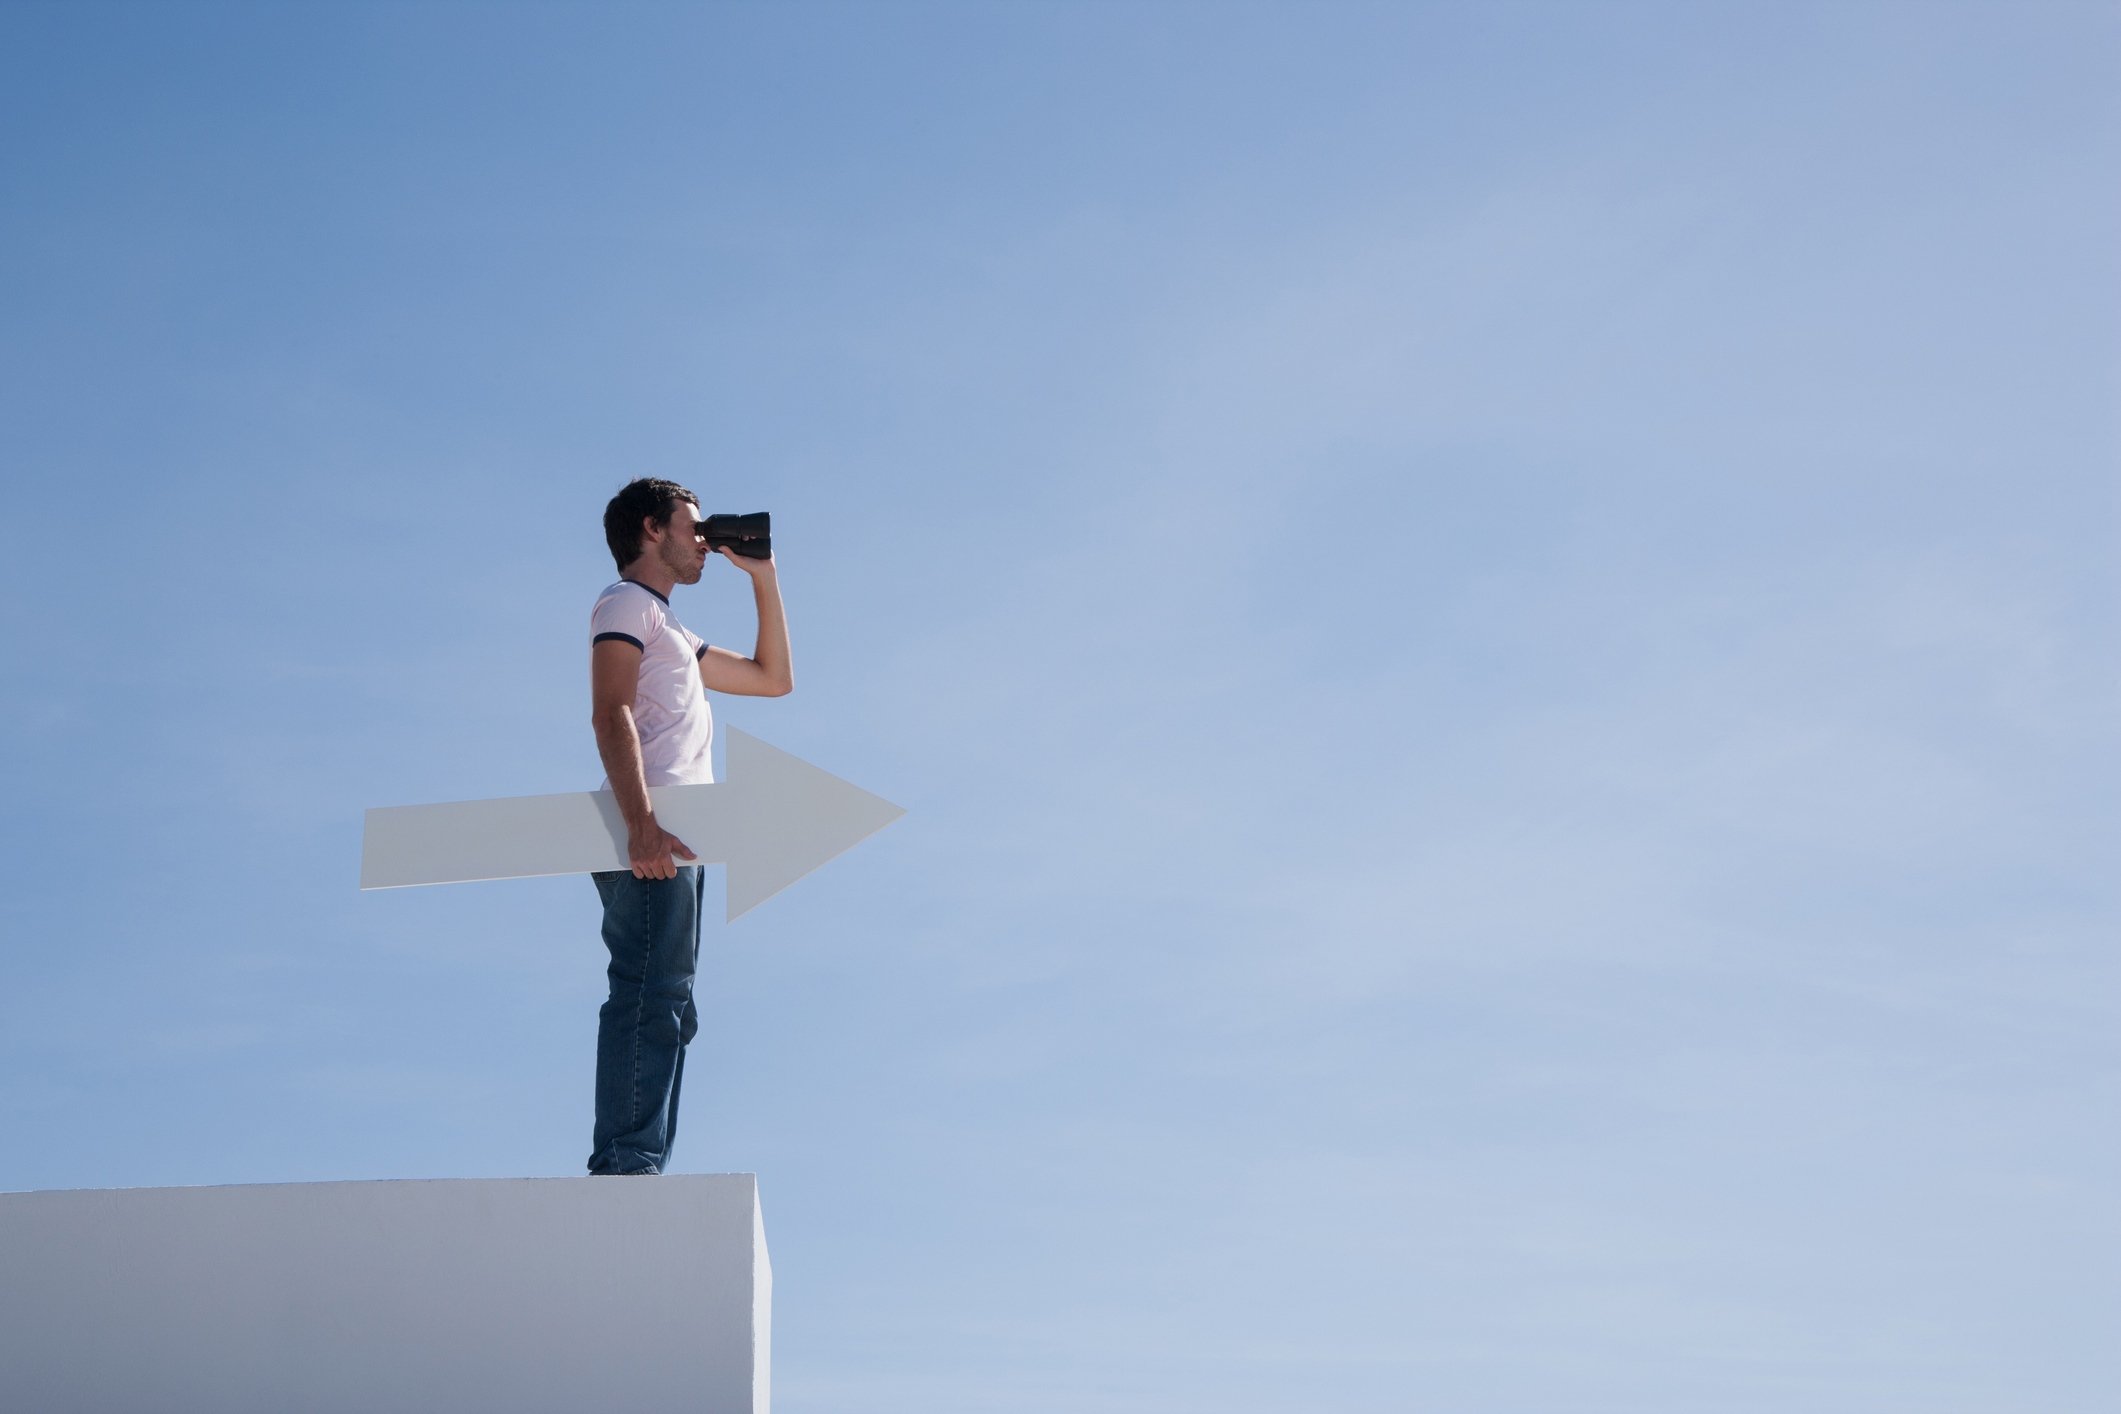 A person stands on a ledge holding binoculars and a paper cutout of an arrow.